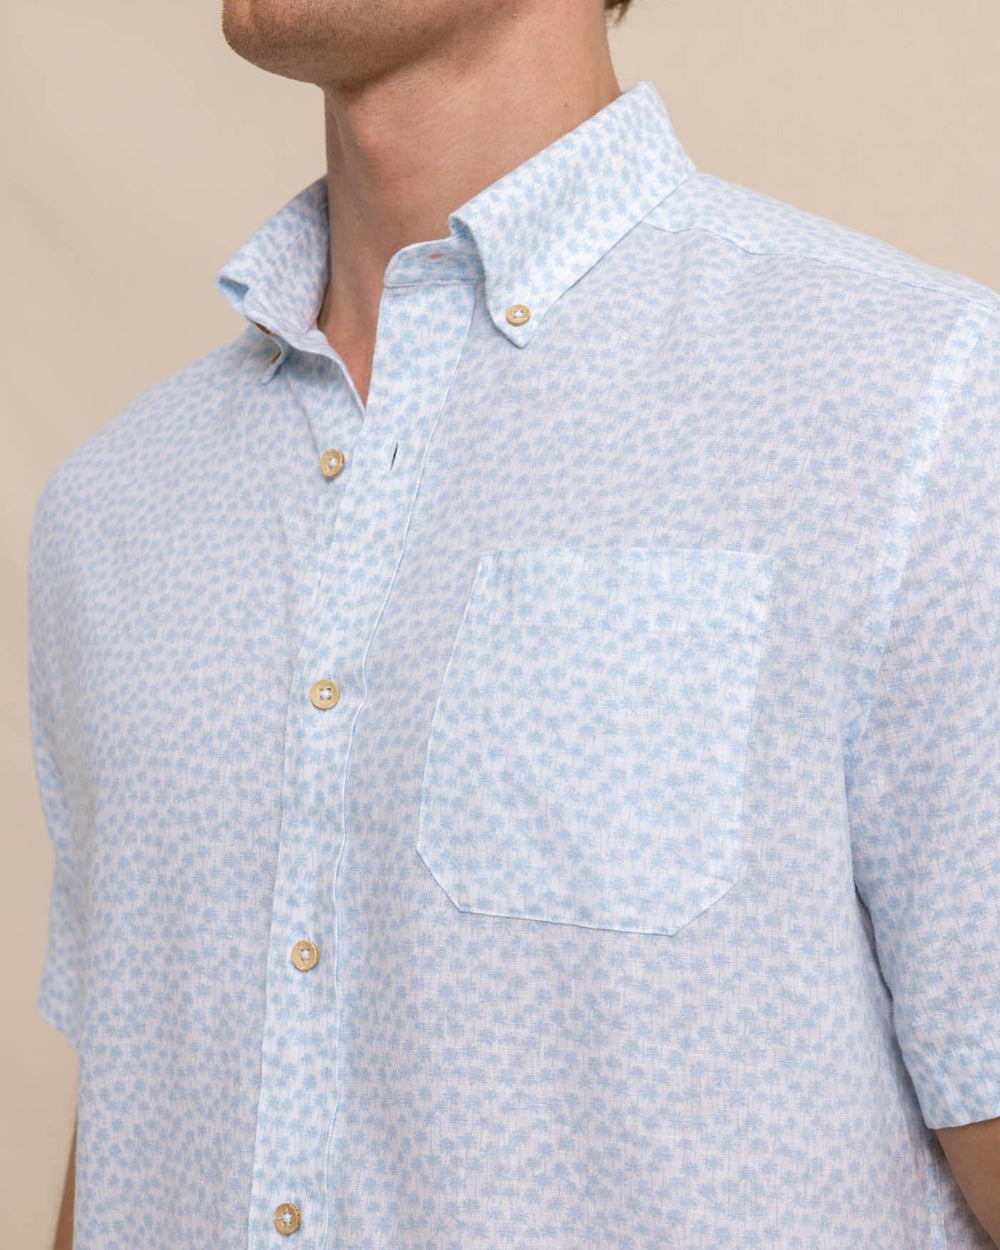 The detail view of the Southern Tide Linen Rayon Palm and Breezy Short Sleeve Sport Shirt by Southern Tide - Clearwater Blue